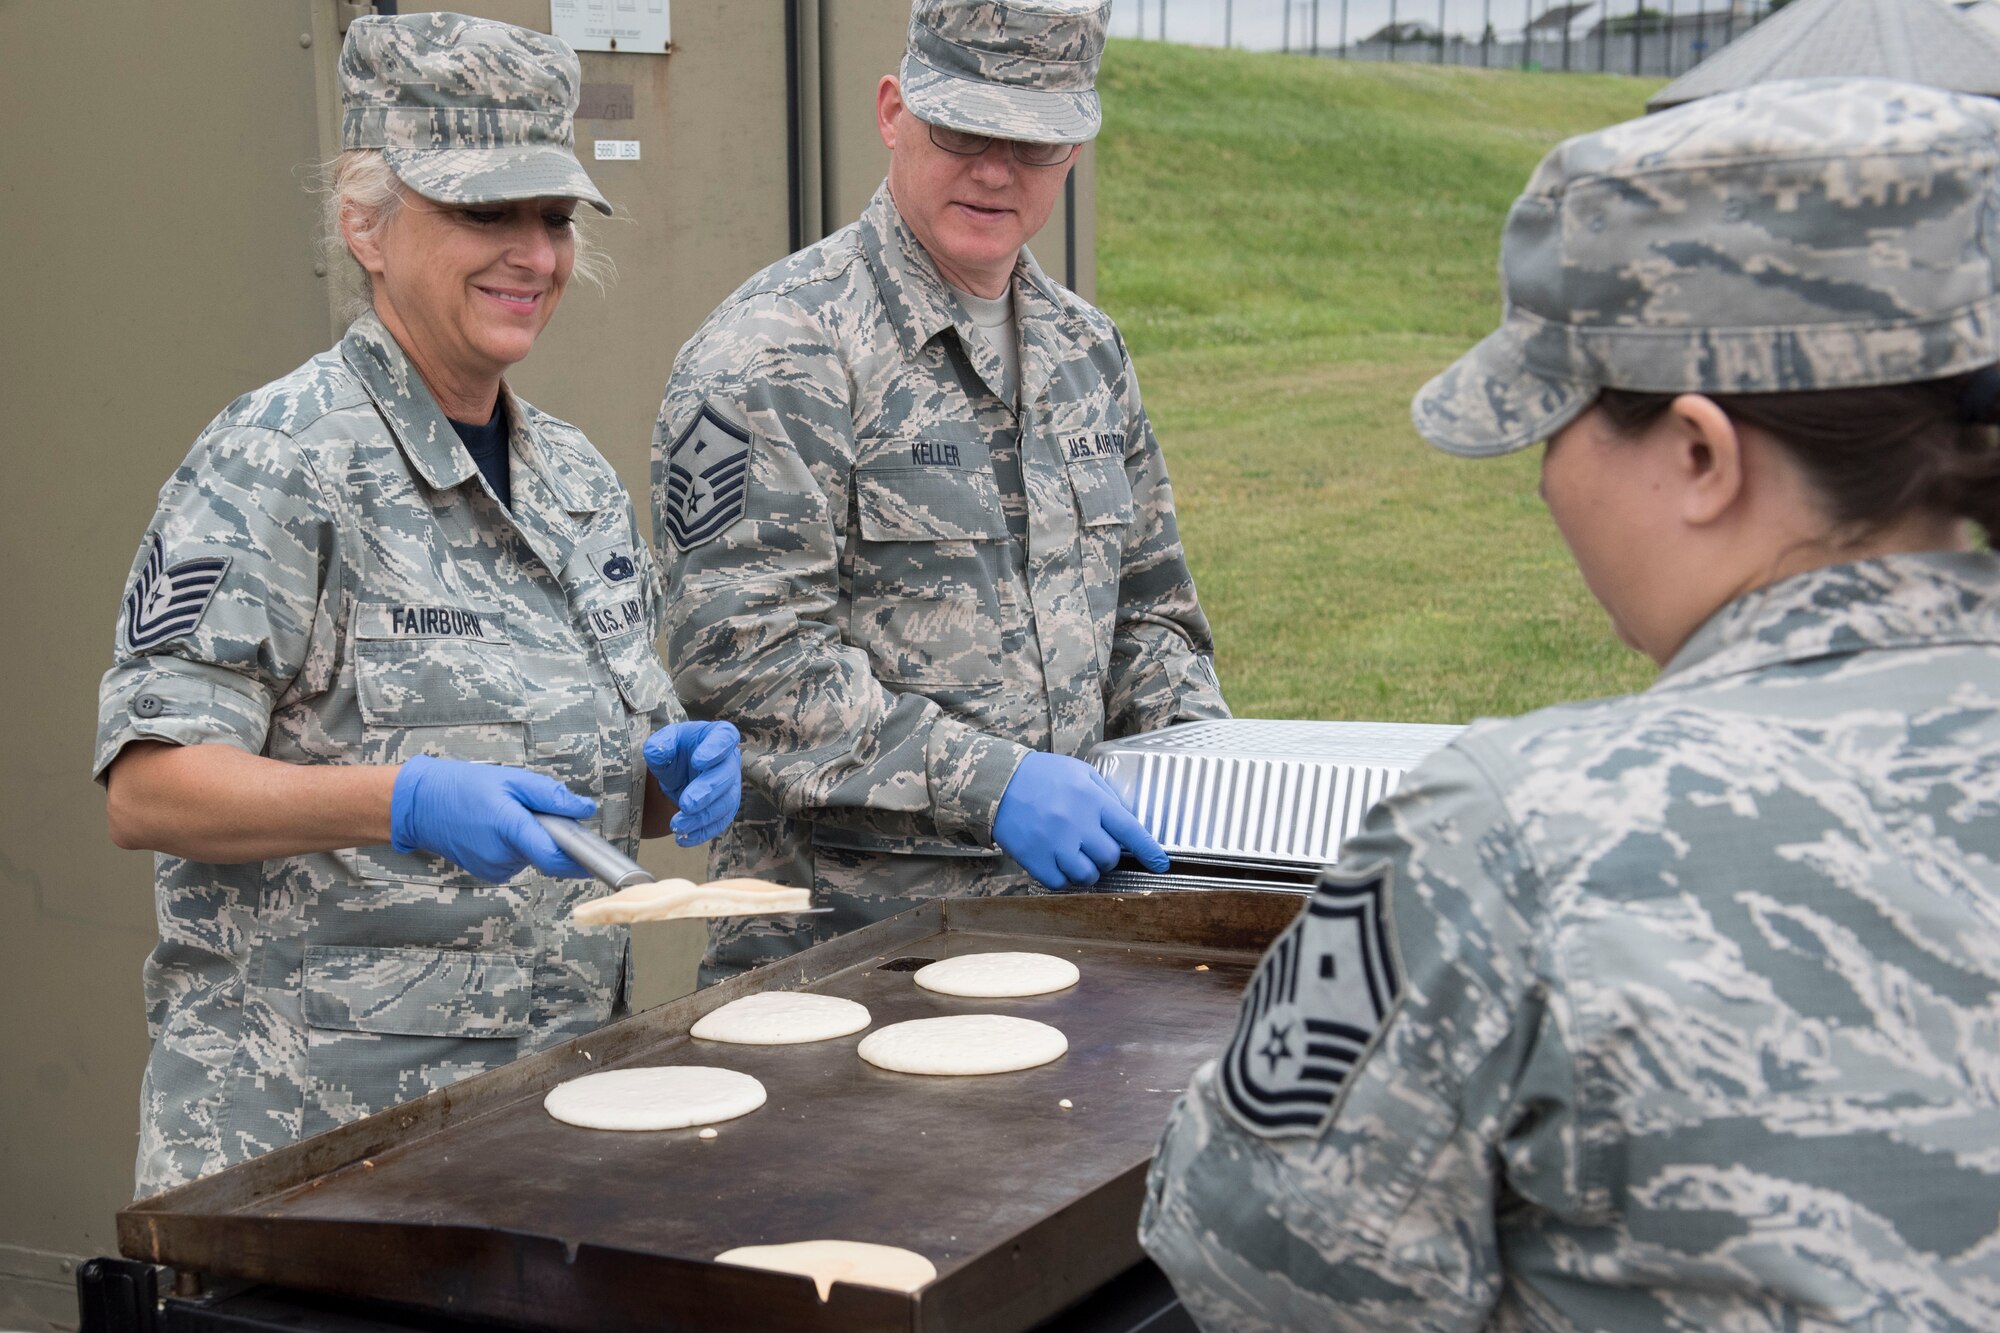 Tech. Sgt. Shannon Fairburn and Master Sgt. James Keller, members of the 167th Airlift Wing, serve pancakes outside of building 309 at the 167th Airlift Wing, June 6, 2019. The pancake breakfast was sponsored and planned by the First Sergeant Council. Approximately 300 Airmen enjoyed the pancakes and about $200 was raised in donations that the council plans to use towards different sponsorships. (U.S. Air National Guard photo by Tech. Sgt. Michael Dickson)